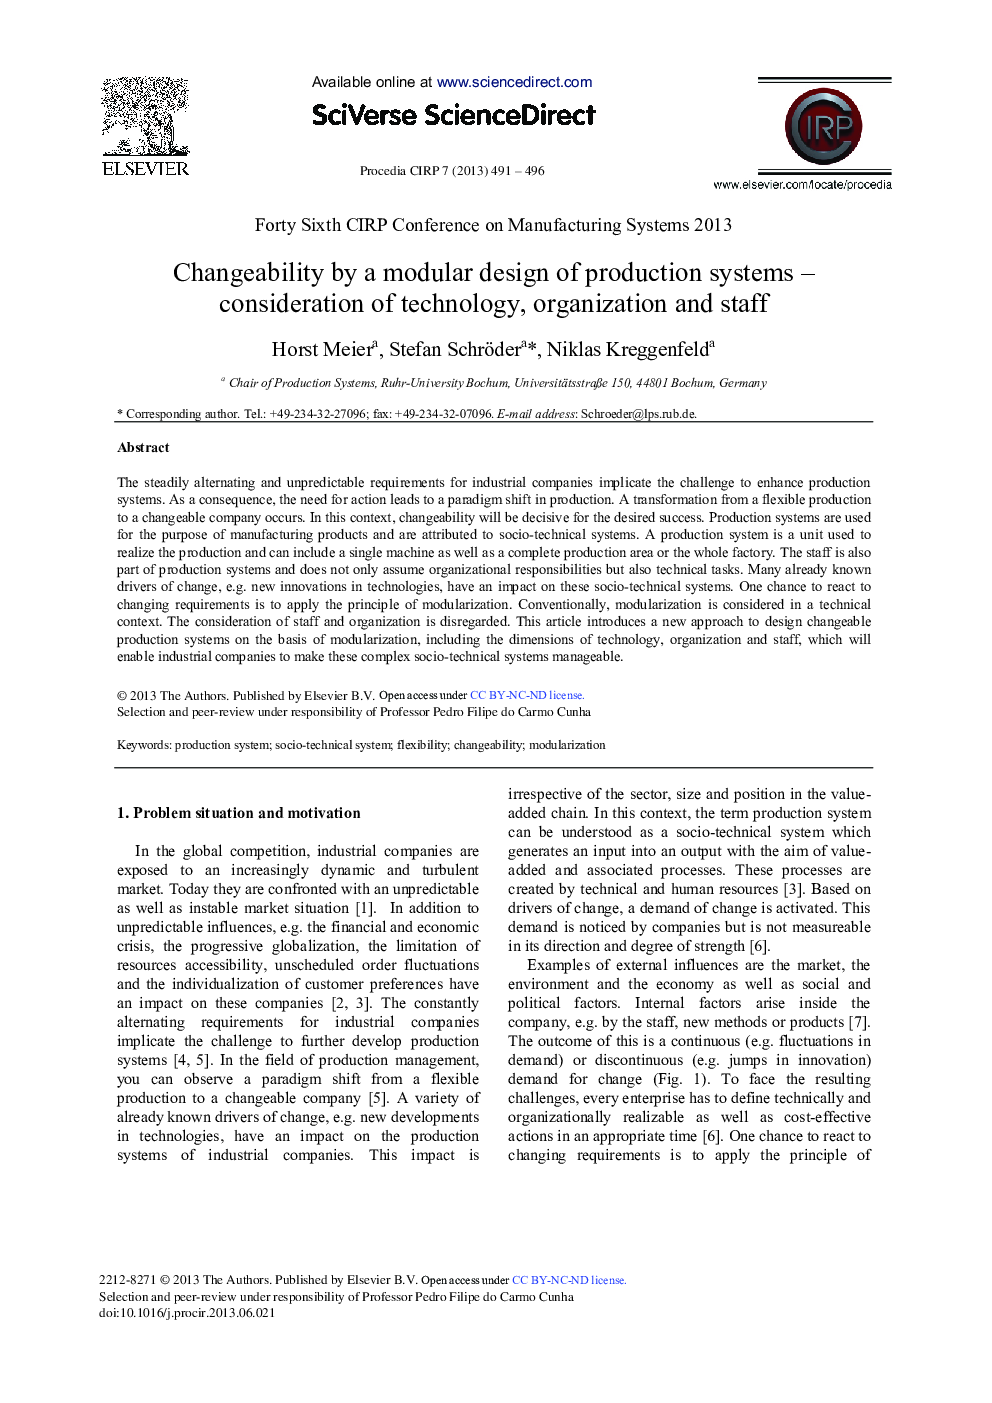 Changeability by a Modular Design of Production Systems – Consideration of Technology, Organization and Staff 